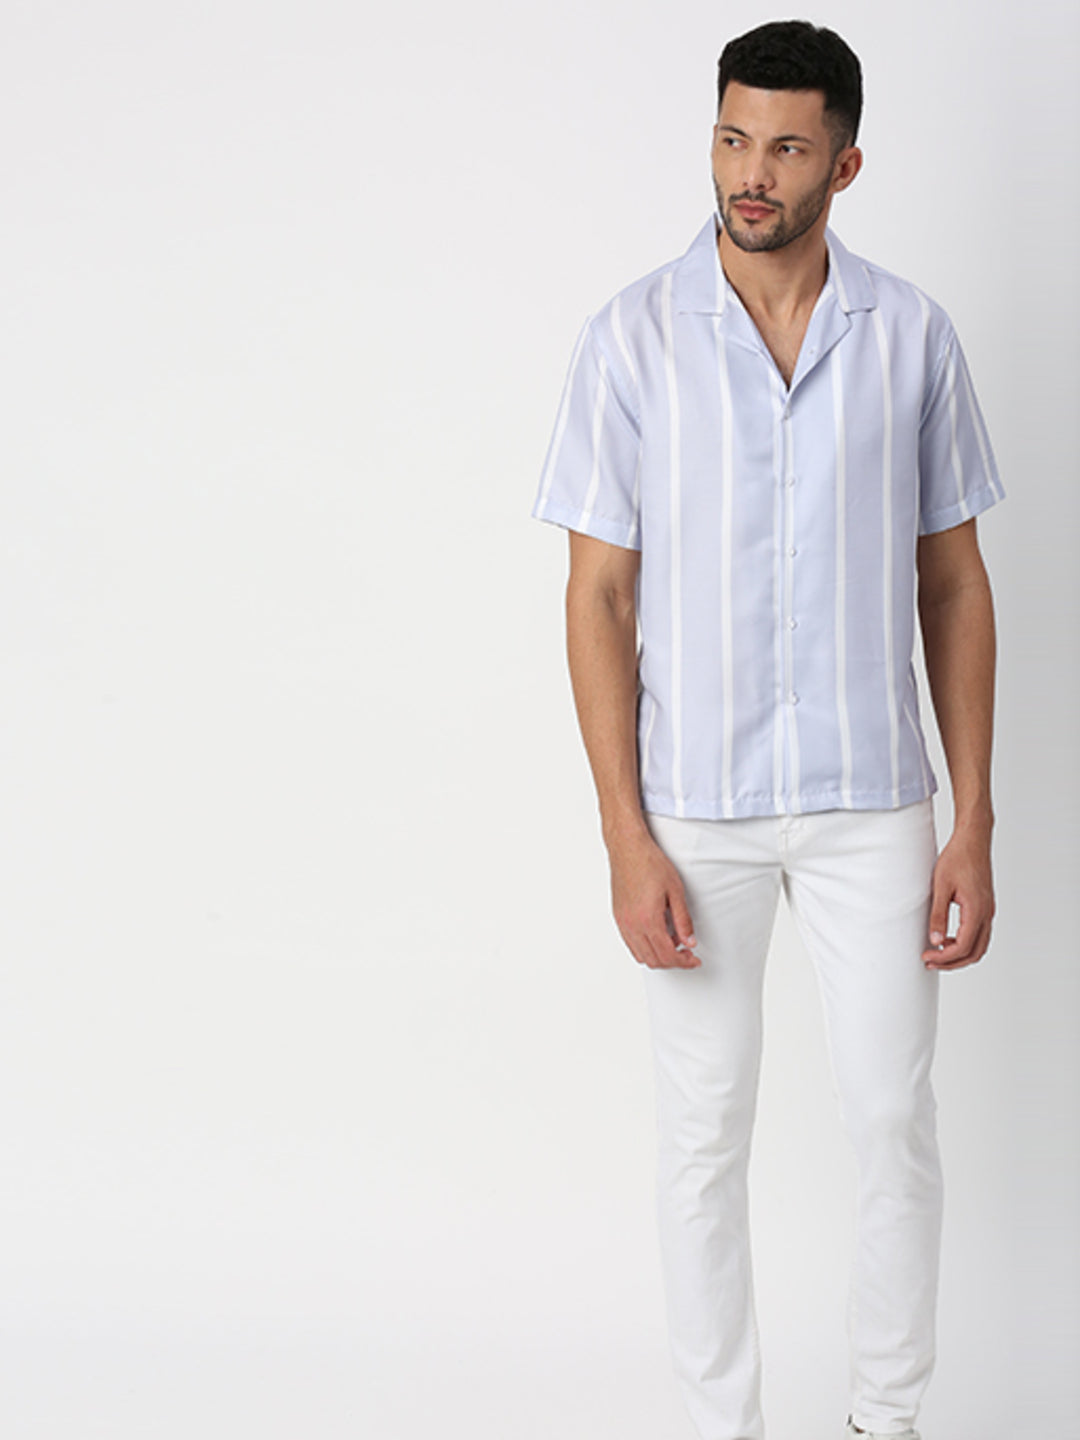 Hemsters White and Purple Half Sleeves Shirt For Men